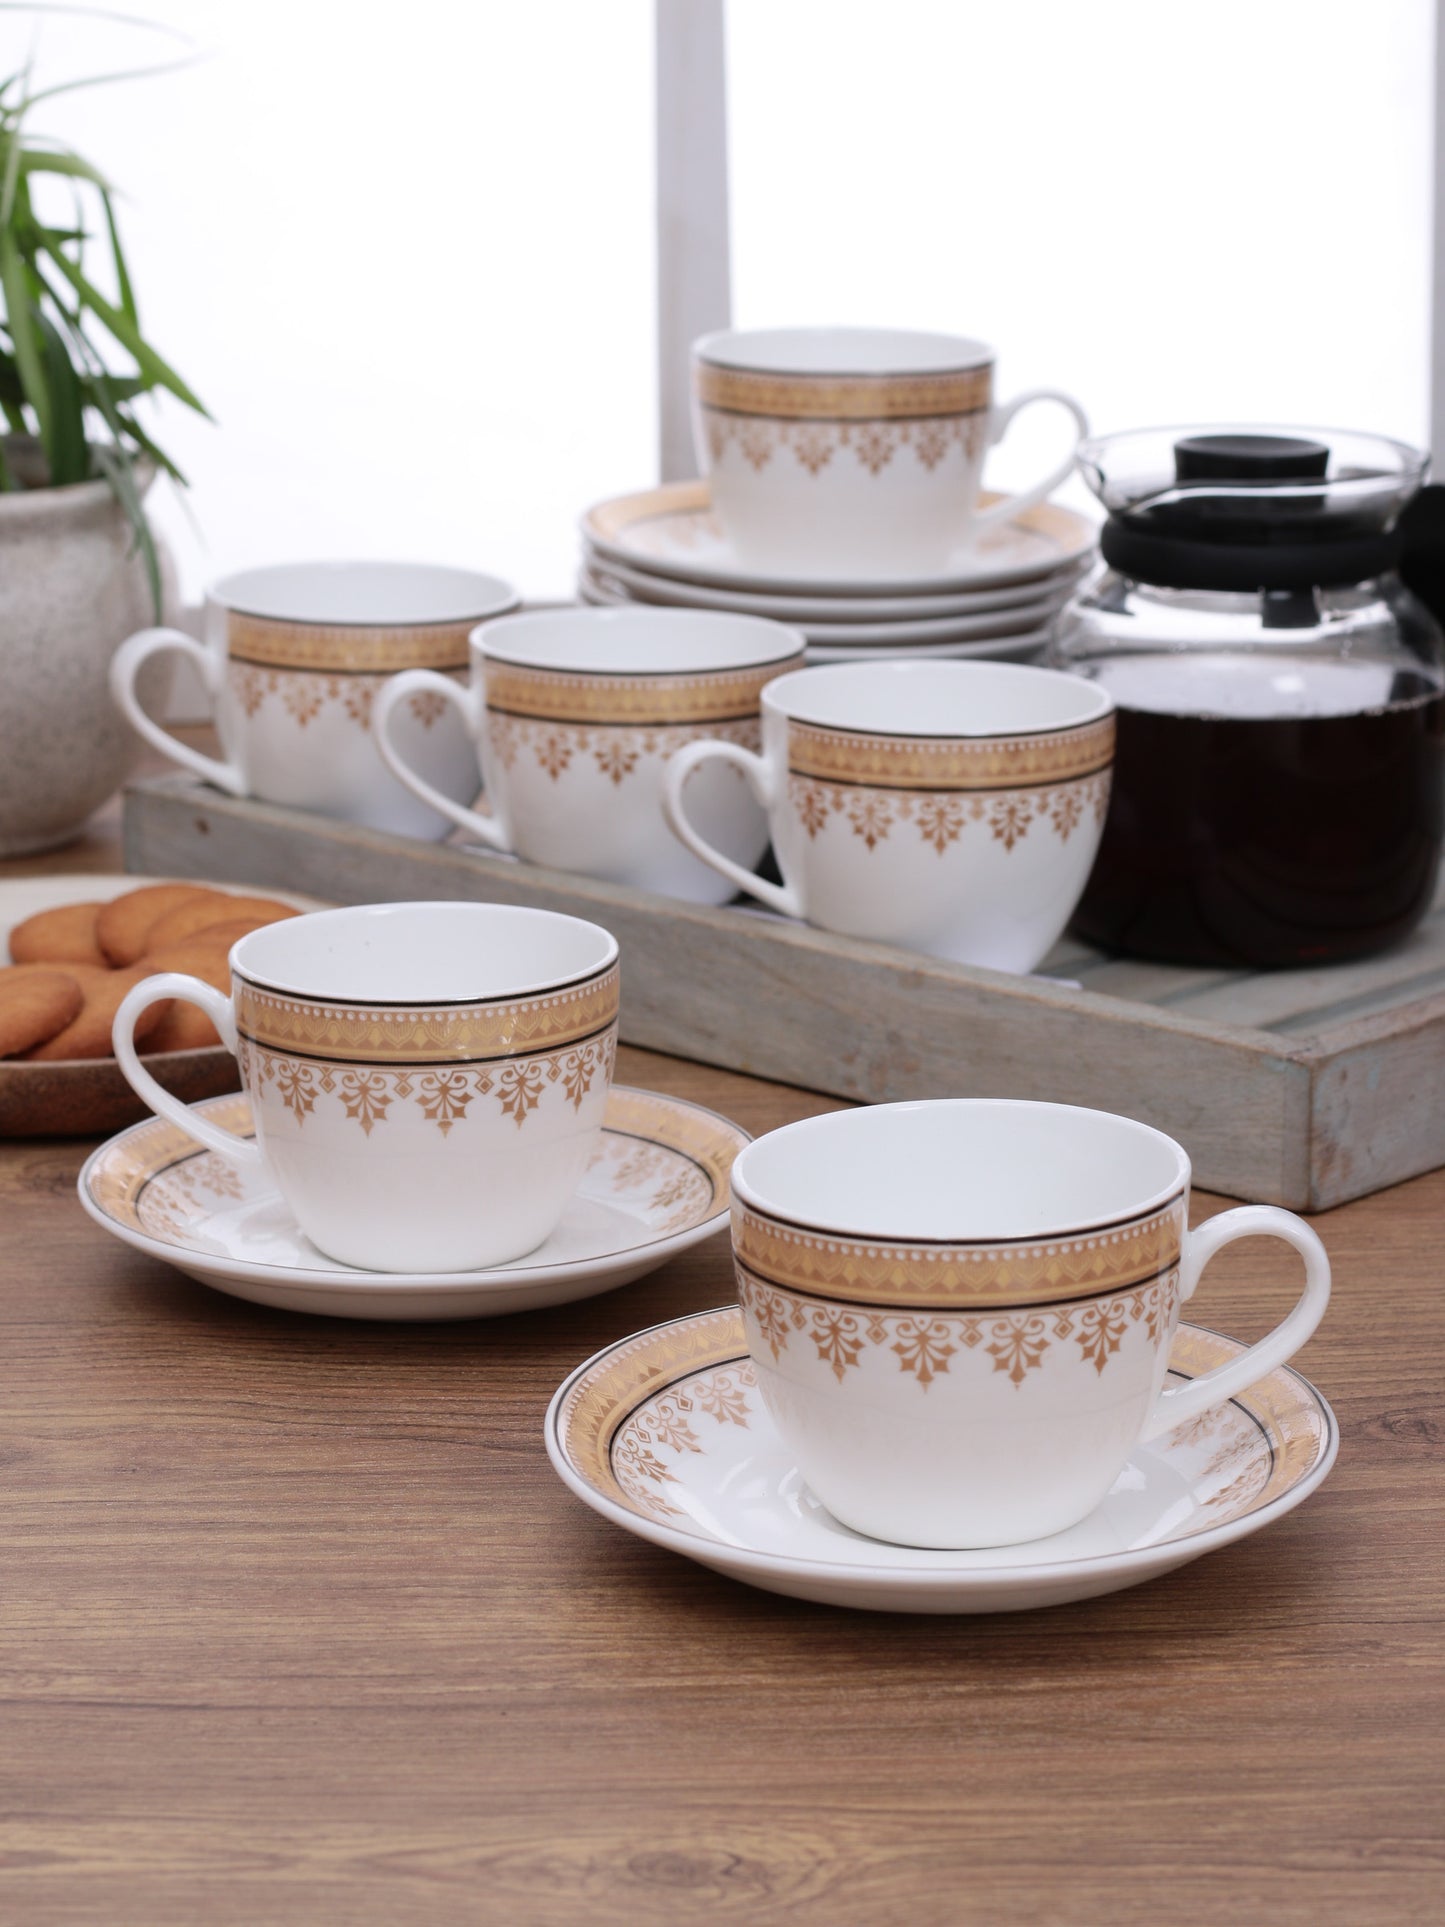 Cream Super Cup & Saucer, 210ml, Set of 12 (6 Cups + 6 Saucers) (S370)